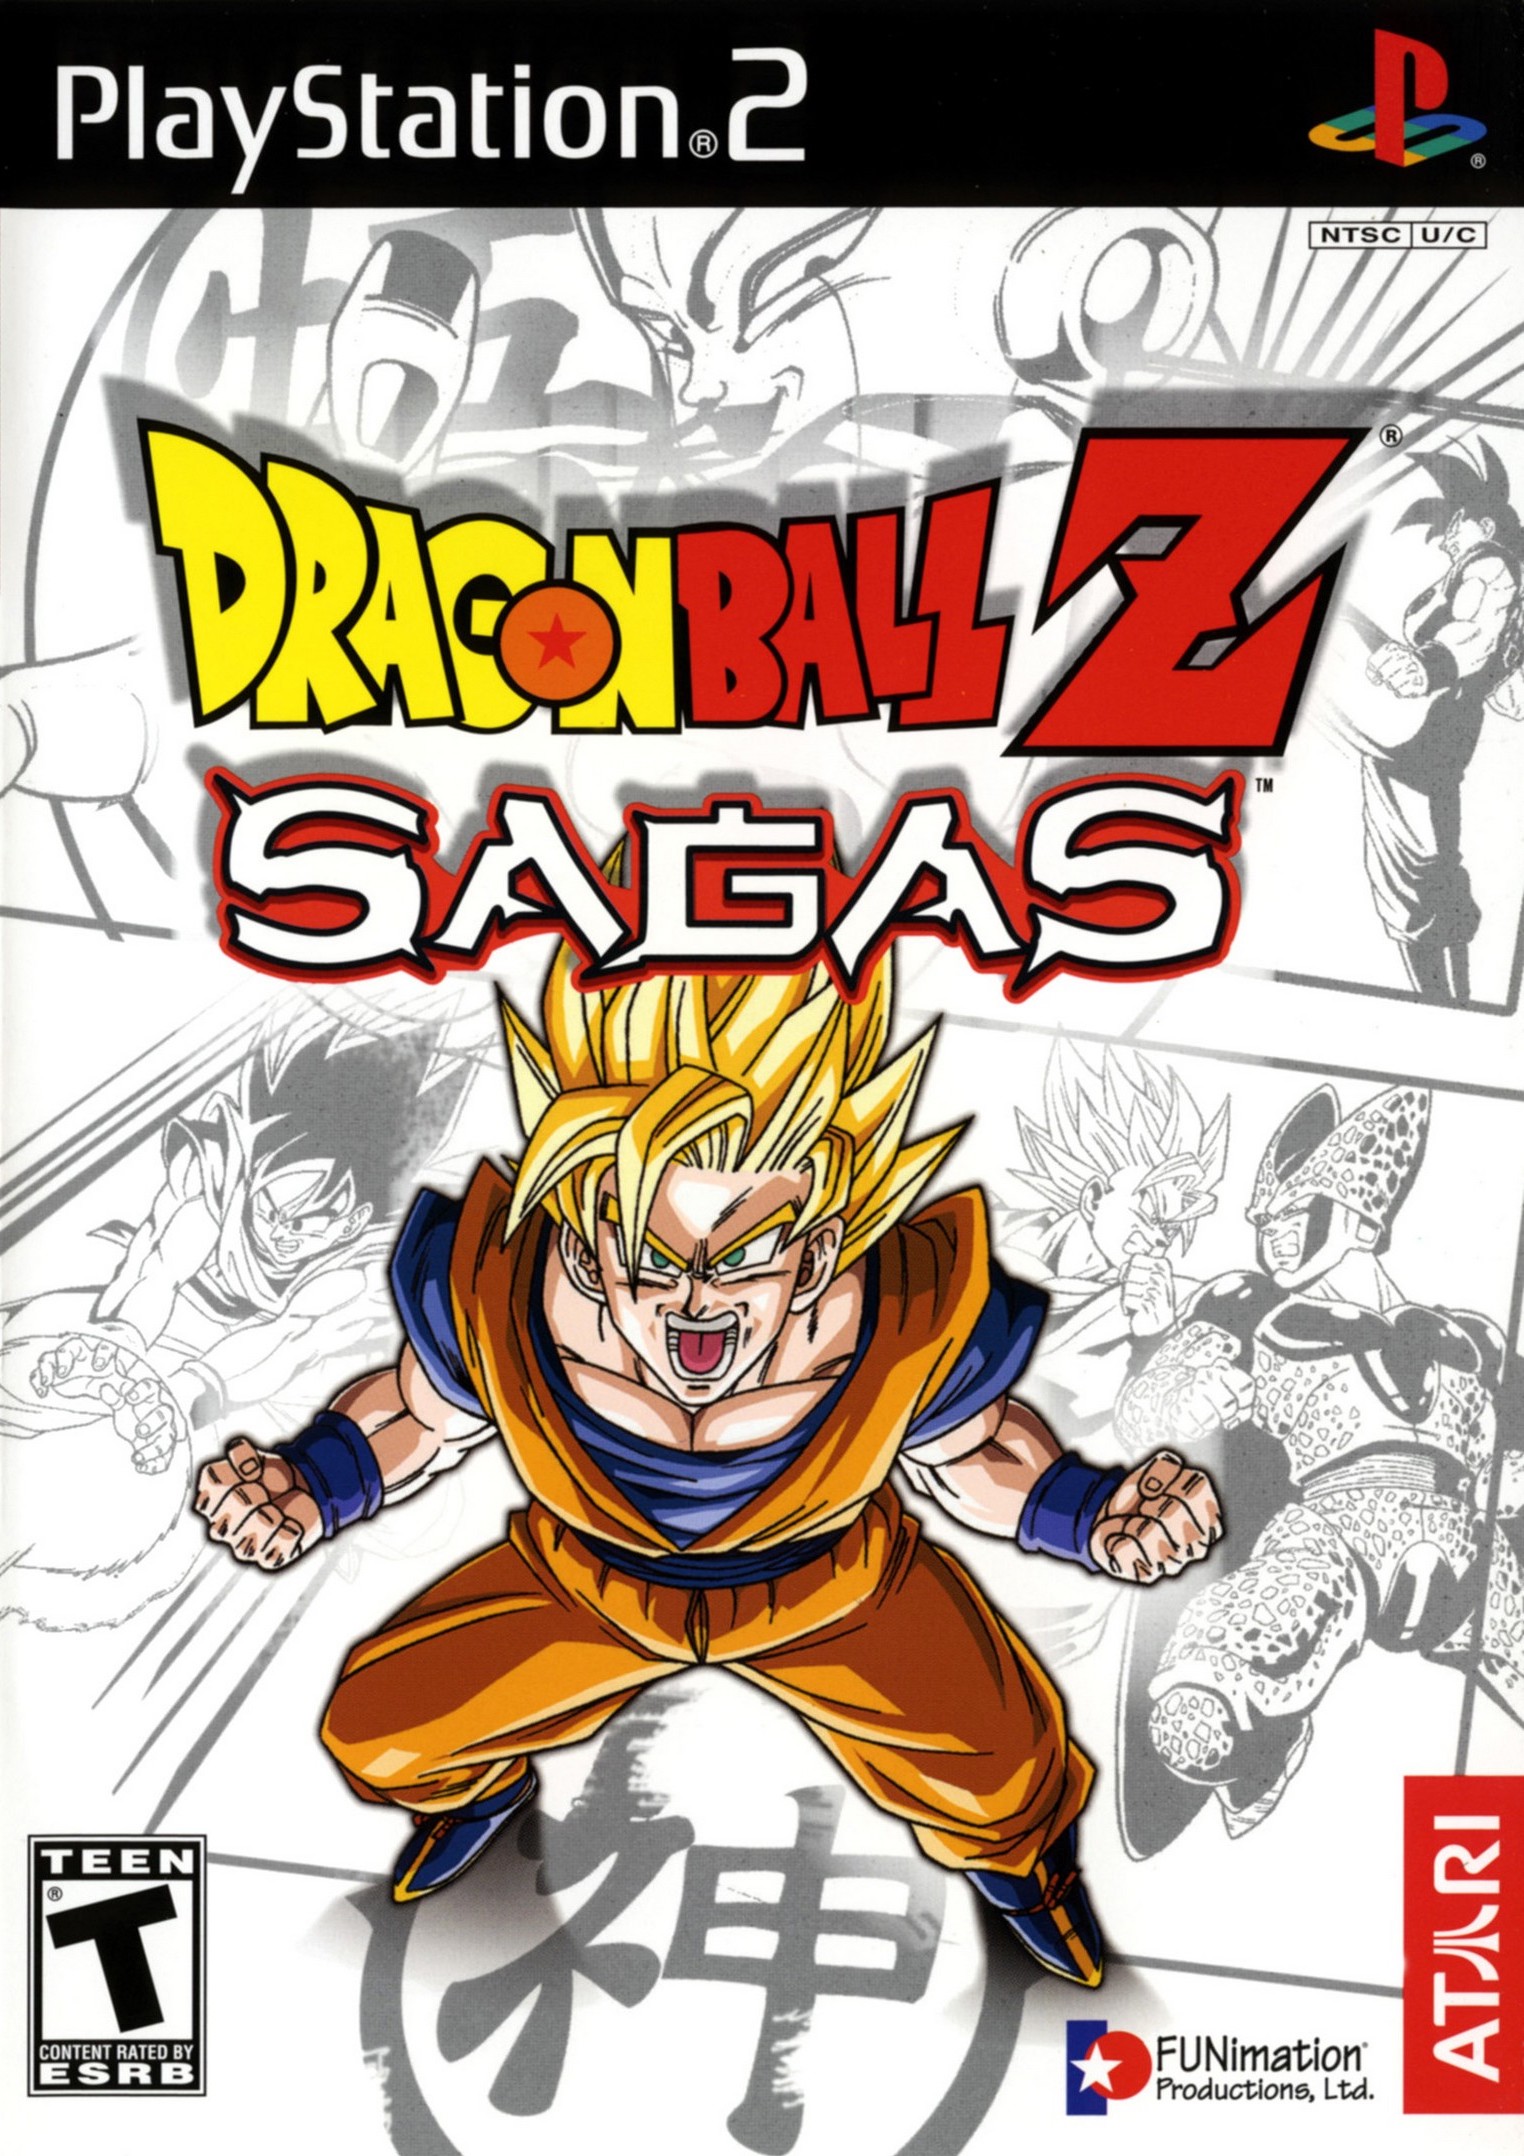 Dragon Ball Z: Sagas — StrategyWiki, the video game walkthrough and strategy guide wiki